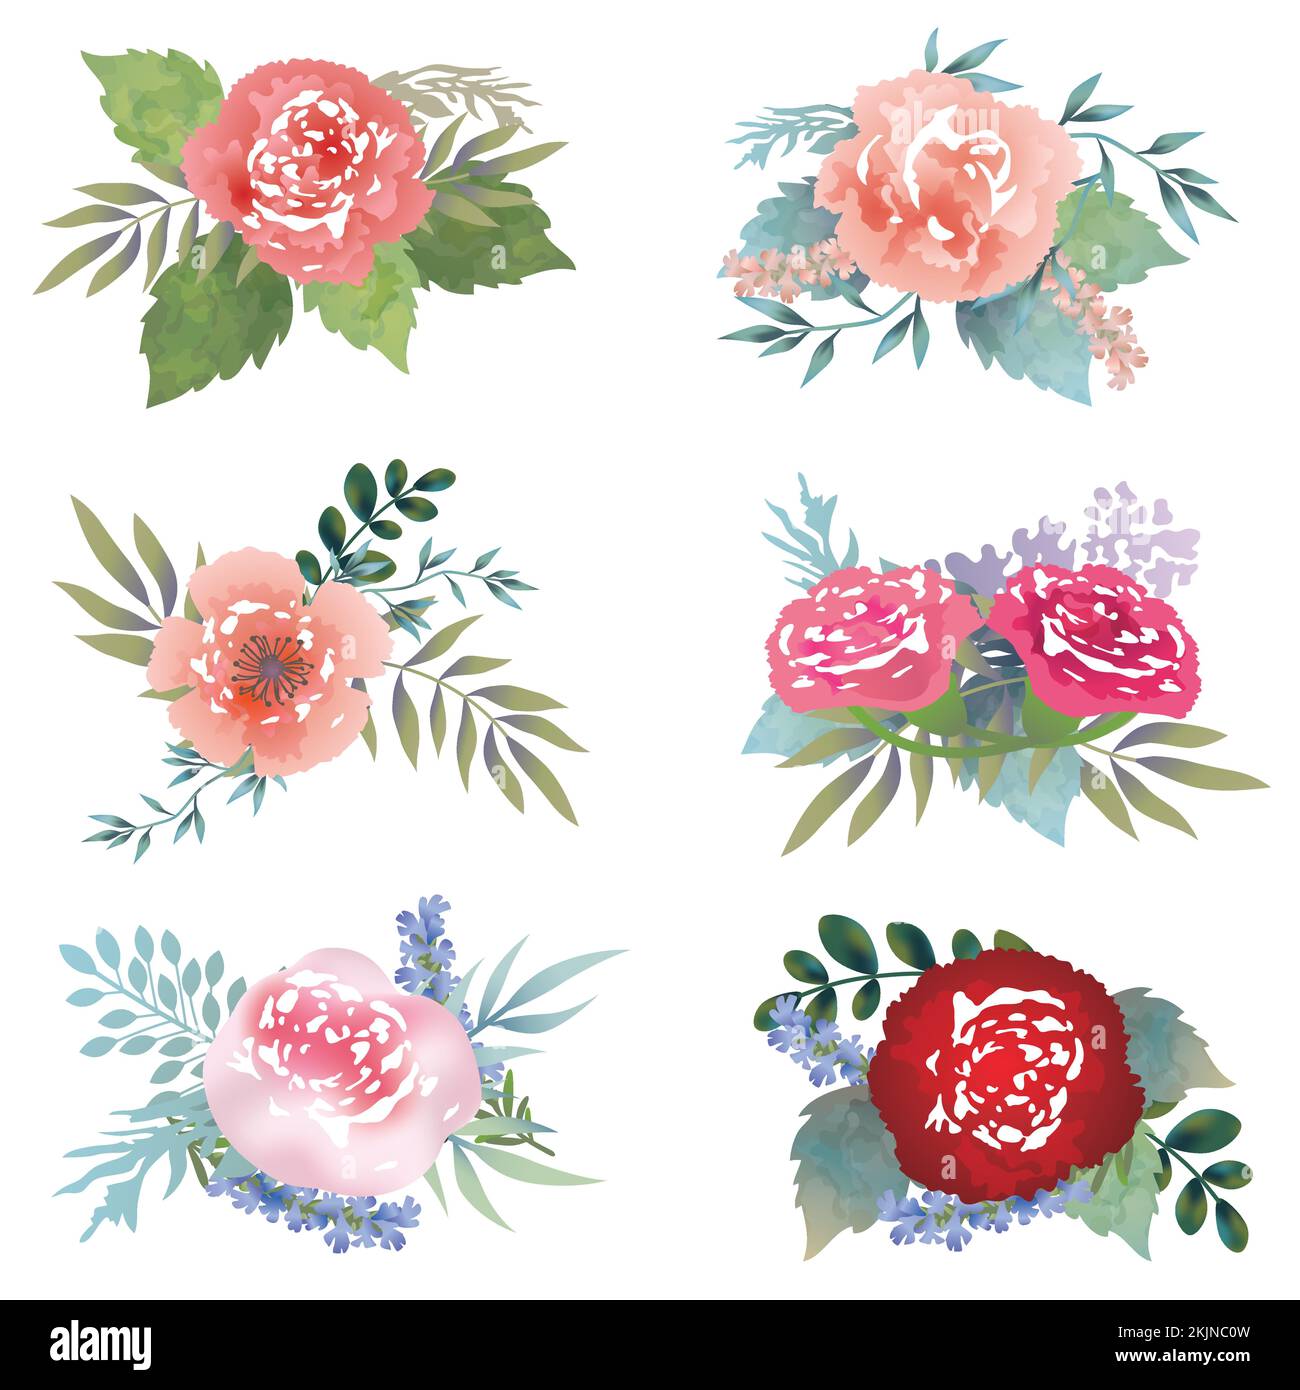 Set of watercolor floral elements isolated on a white background. Vector illustration. Stock Vector